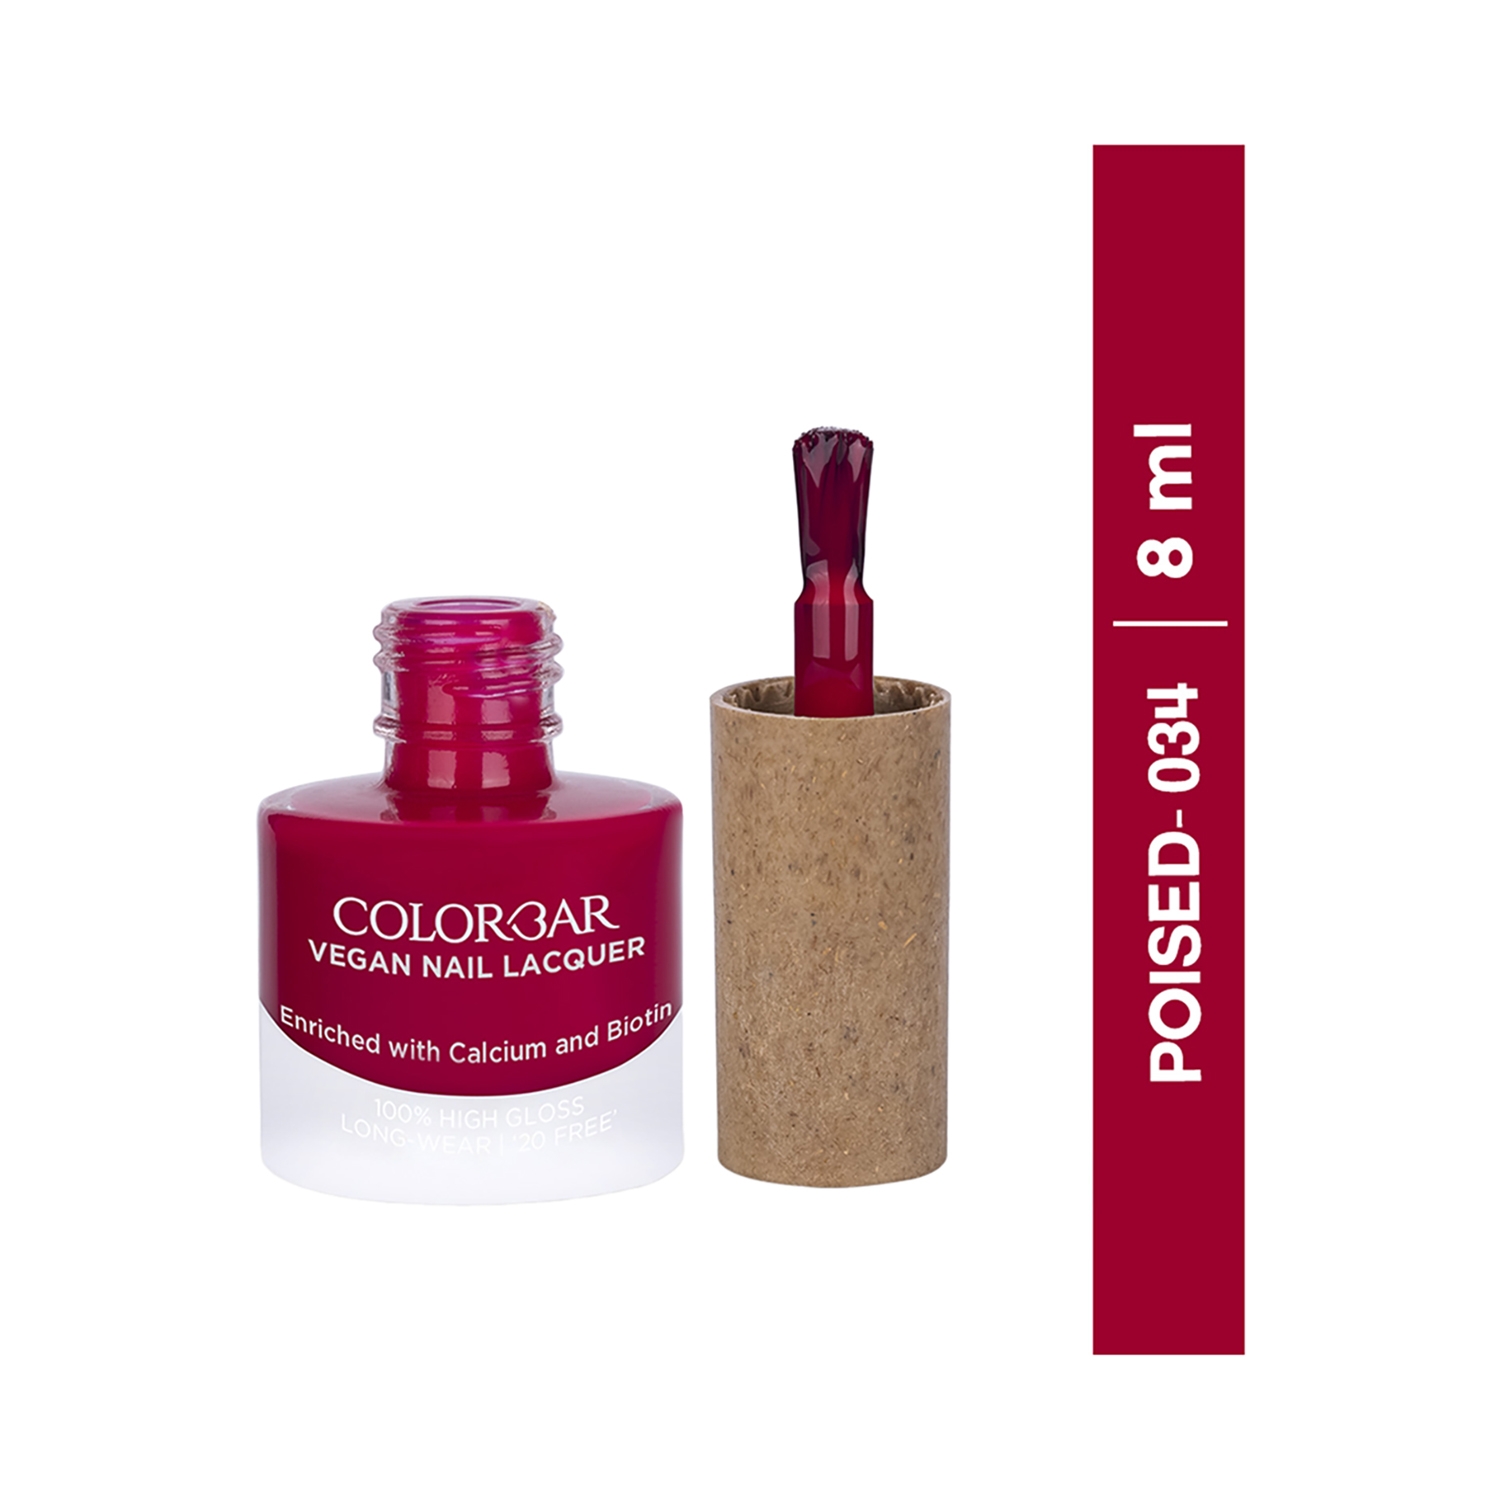 Priyeta Sisodia - Worth it or not?? Colorbar matte nail lacquer Shade 002  pinked 12 ml for Rs. 350 Colorbar claims that the nail paint gives  ultra-matte effect within seconds of application.